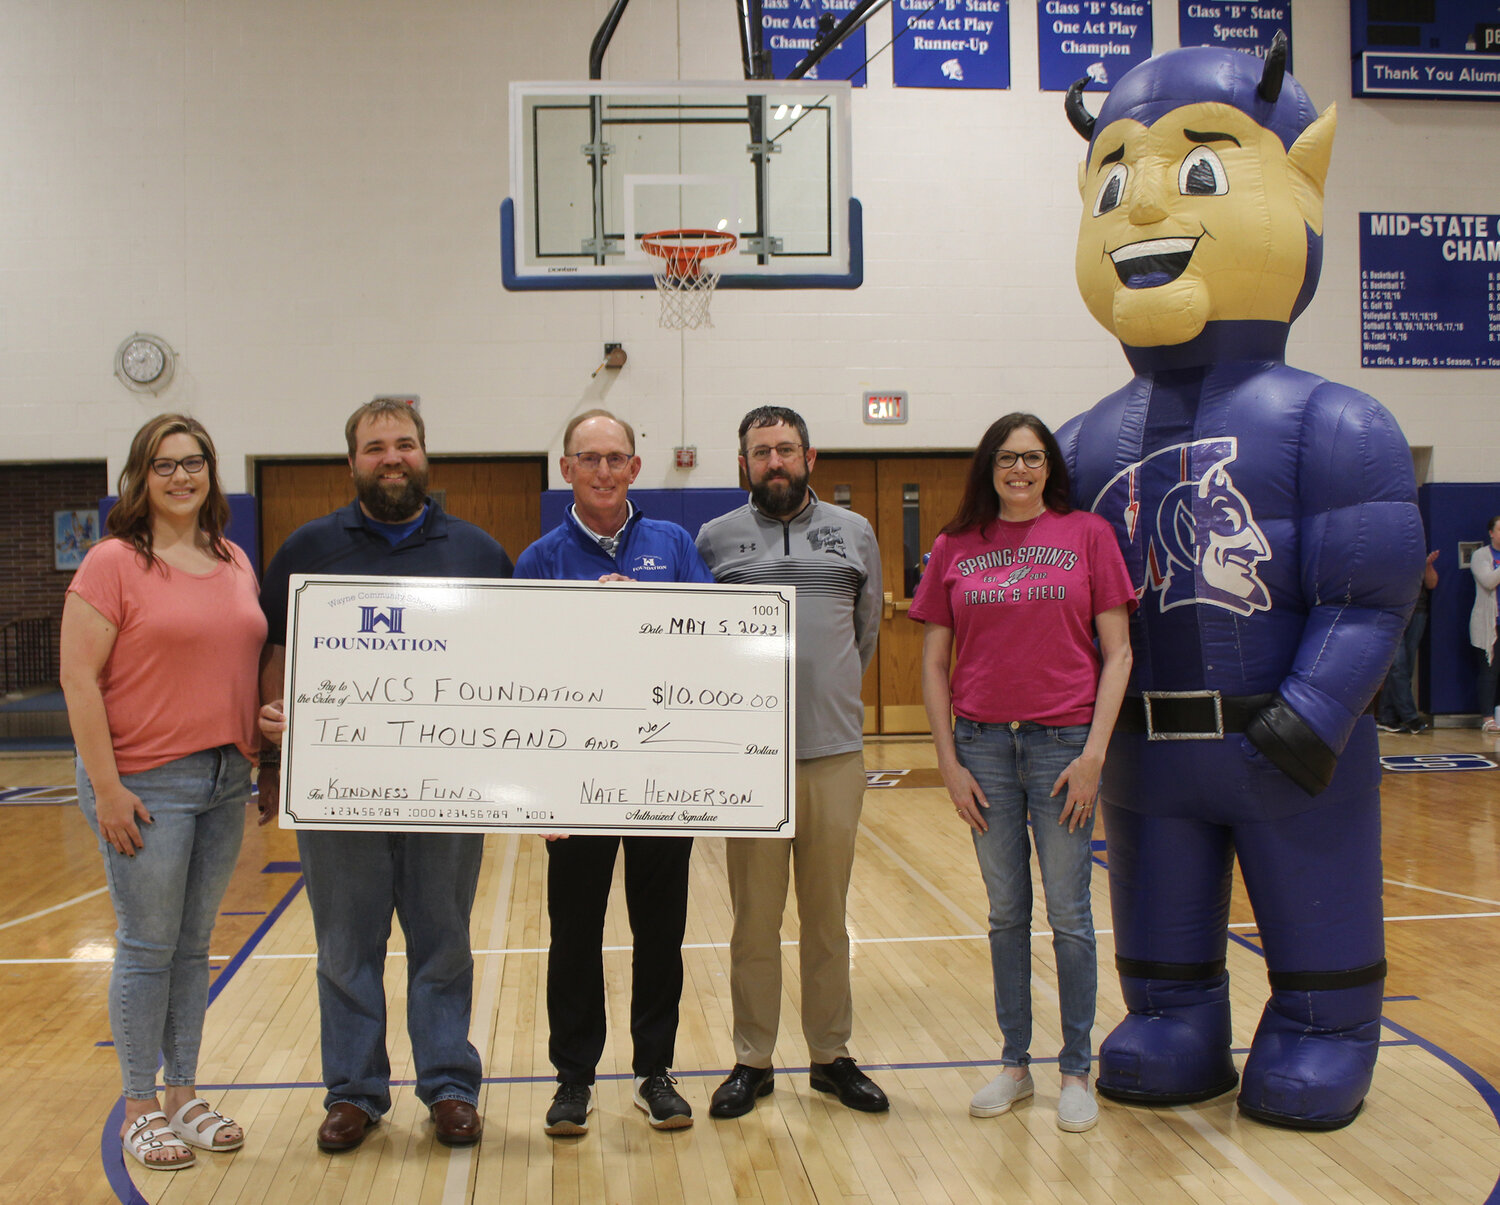 Involved in the presentation of a $10,000 check to the Wayne Community Schools Foundation were (left) Andrea Henderson, Nate Henderson, Rusty Park, Mike Varley, Misty Beair and Big Blue. The presentation was made prior to a pep rally at the school honoring those athletes taking part in this year's Spring Sprints. The money will go to the Wayne Schools' Kindness Fund.